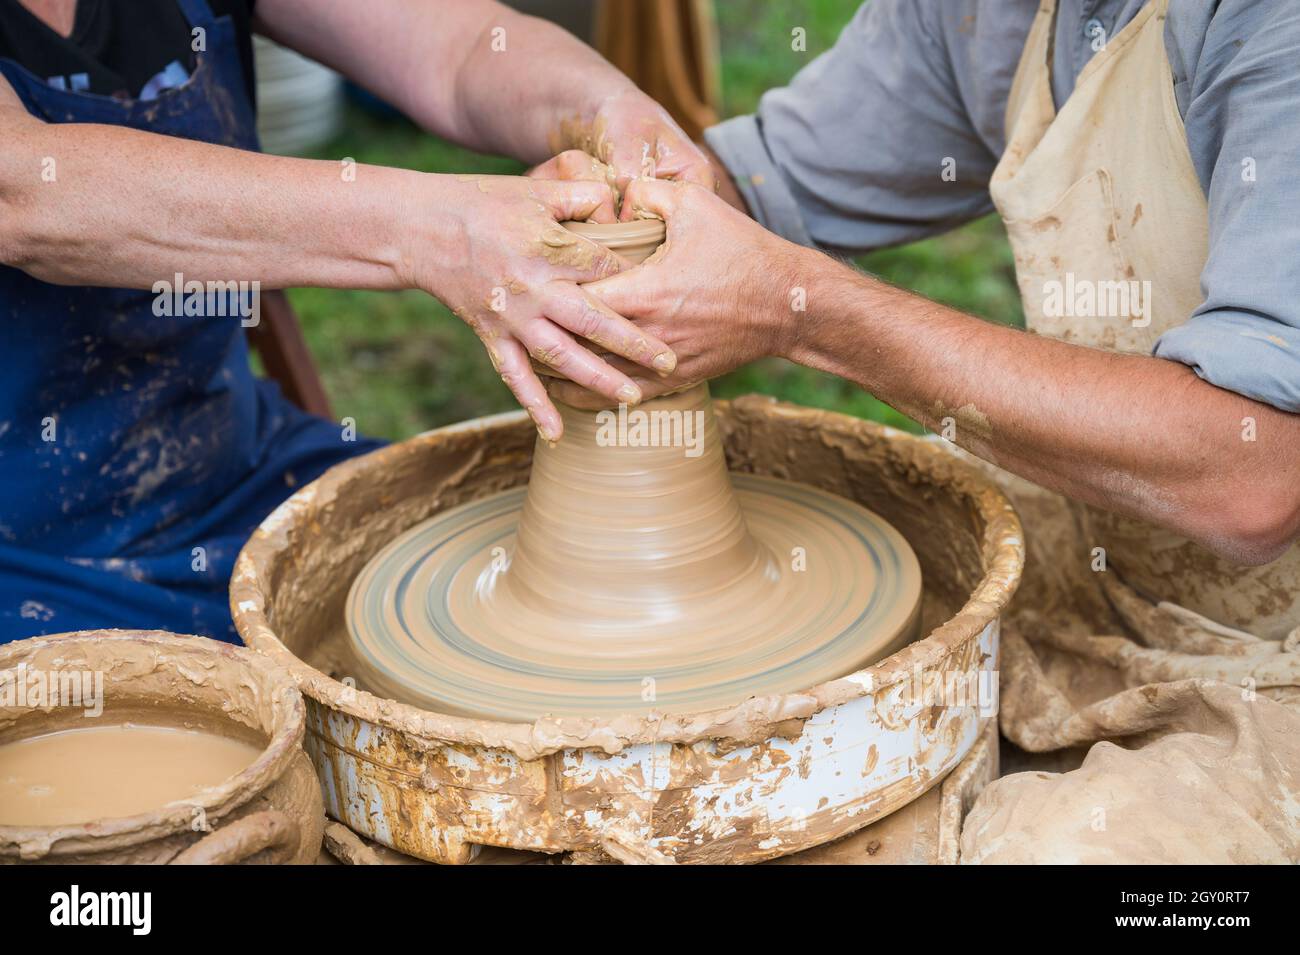 Hands of a woman (student) and a man (teacher) during a pot making workshop Stock Photo